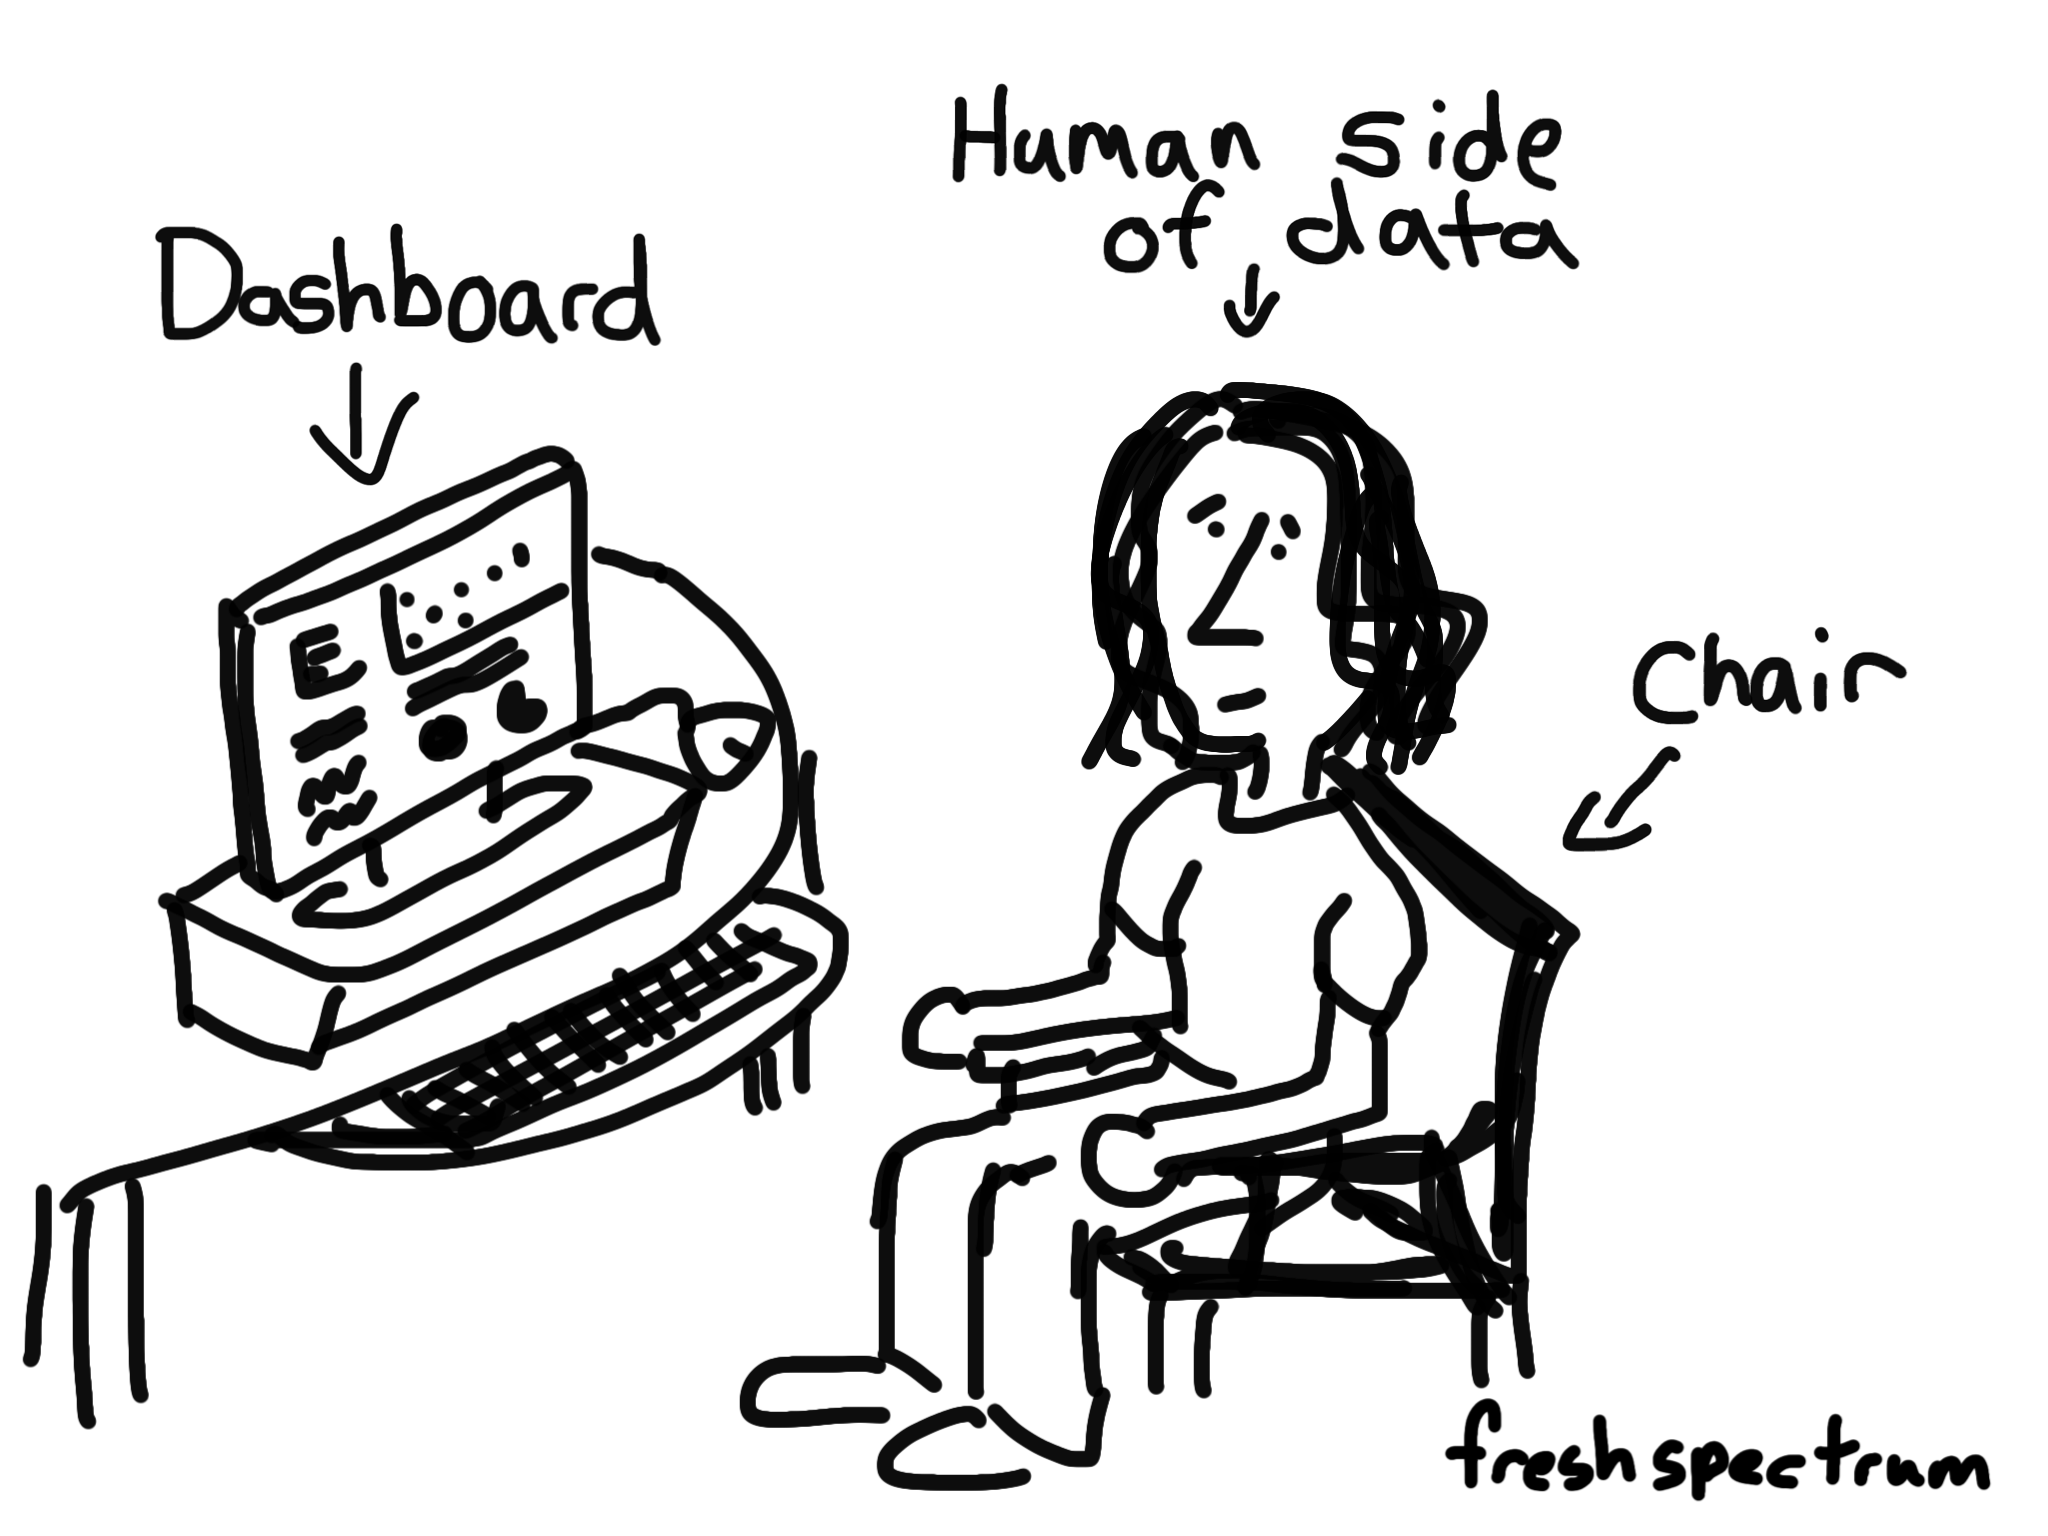 Cartoon-The human side of data between the dashboard and chair